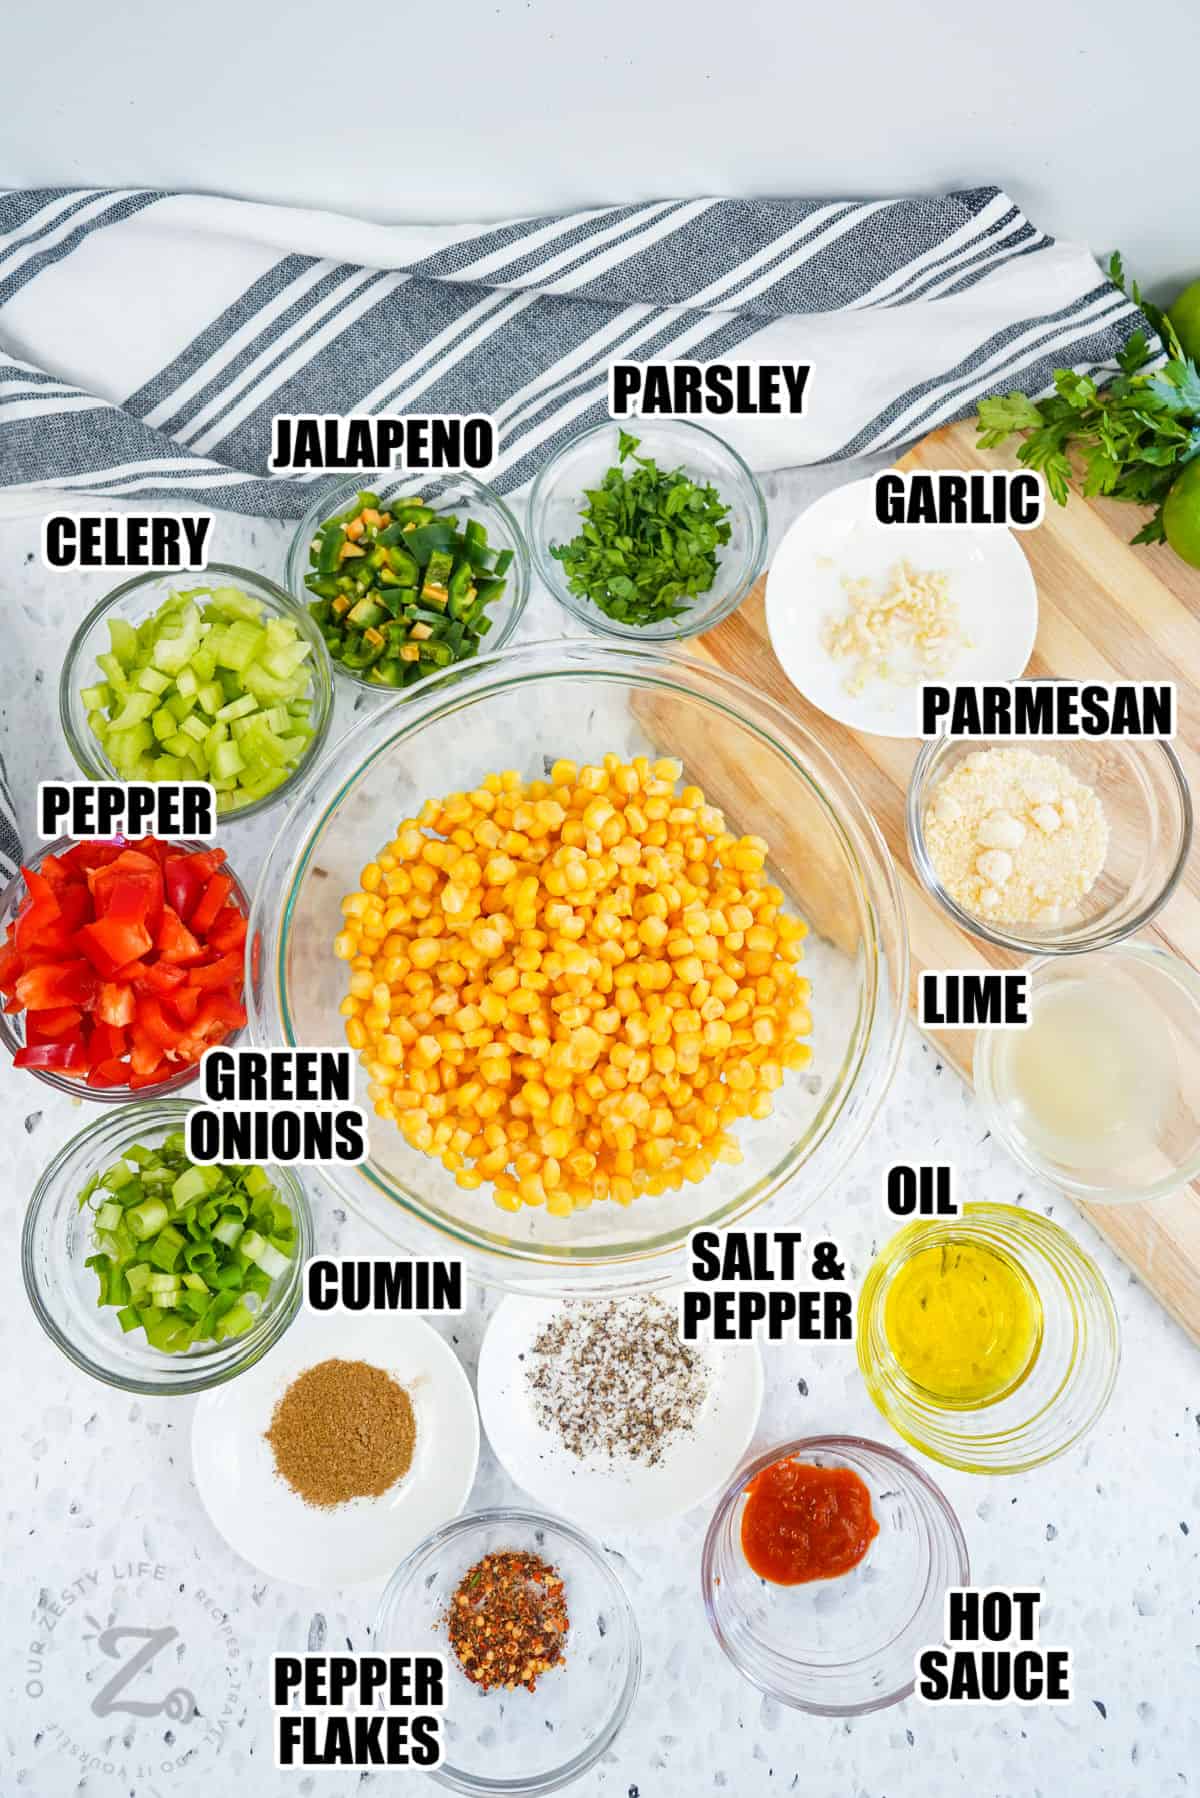 celery , jalapeno , parsley , garlic , parmesan , pepper , lime juice , oil, green onions , cumin , pepper glakes , hot sauce , salt with pepper with labels to make Corn Salad